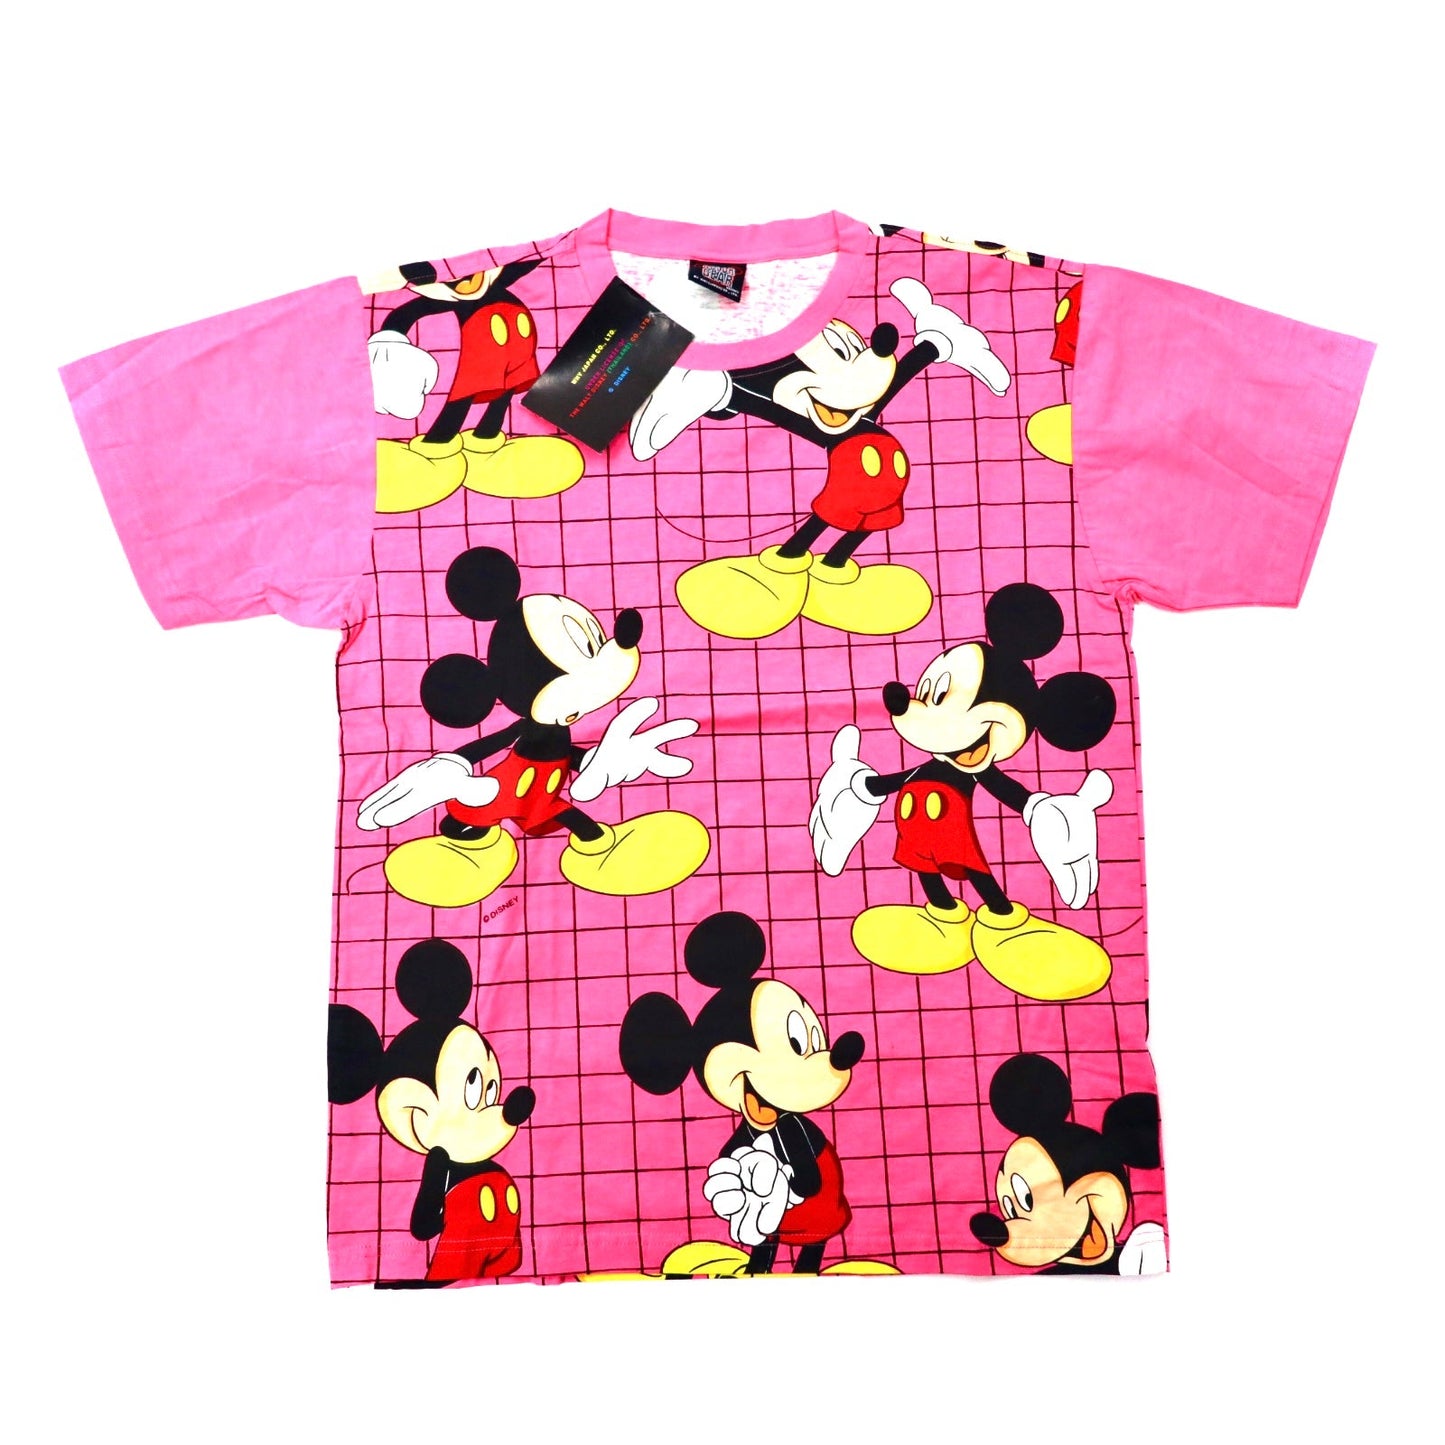 COLOR GEAR Tシャツ XL ピンク MICKEY MOUSE ビッグサイズ 未使用品-VINTAGE-古着